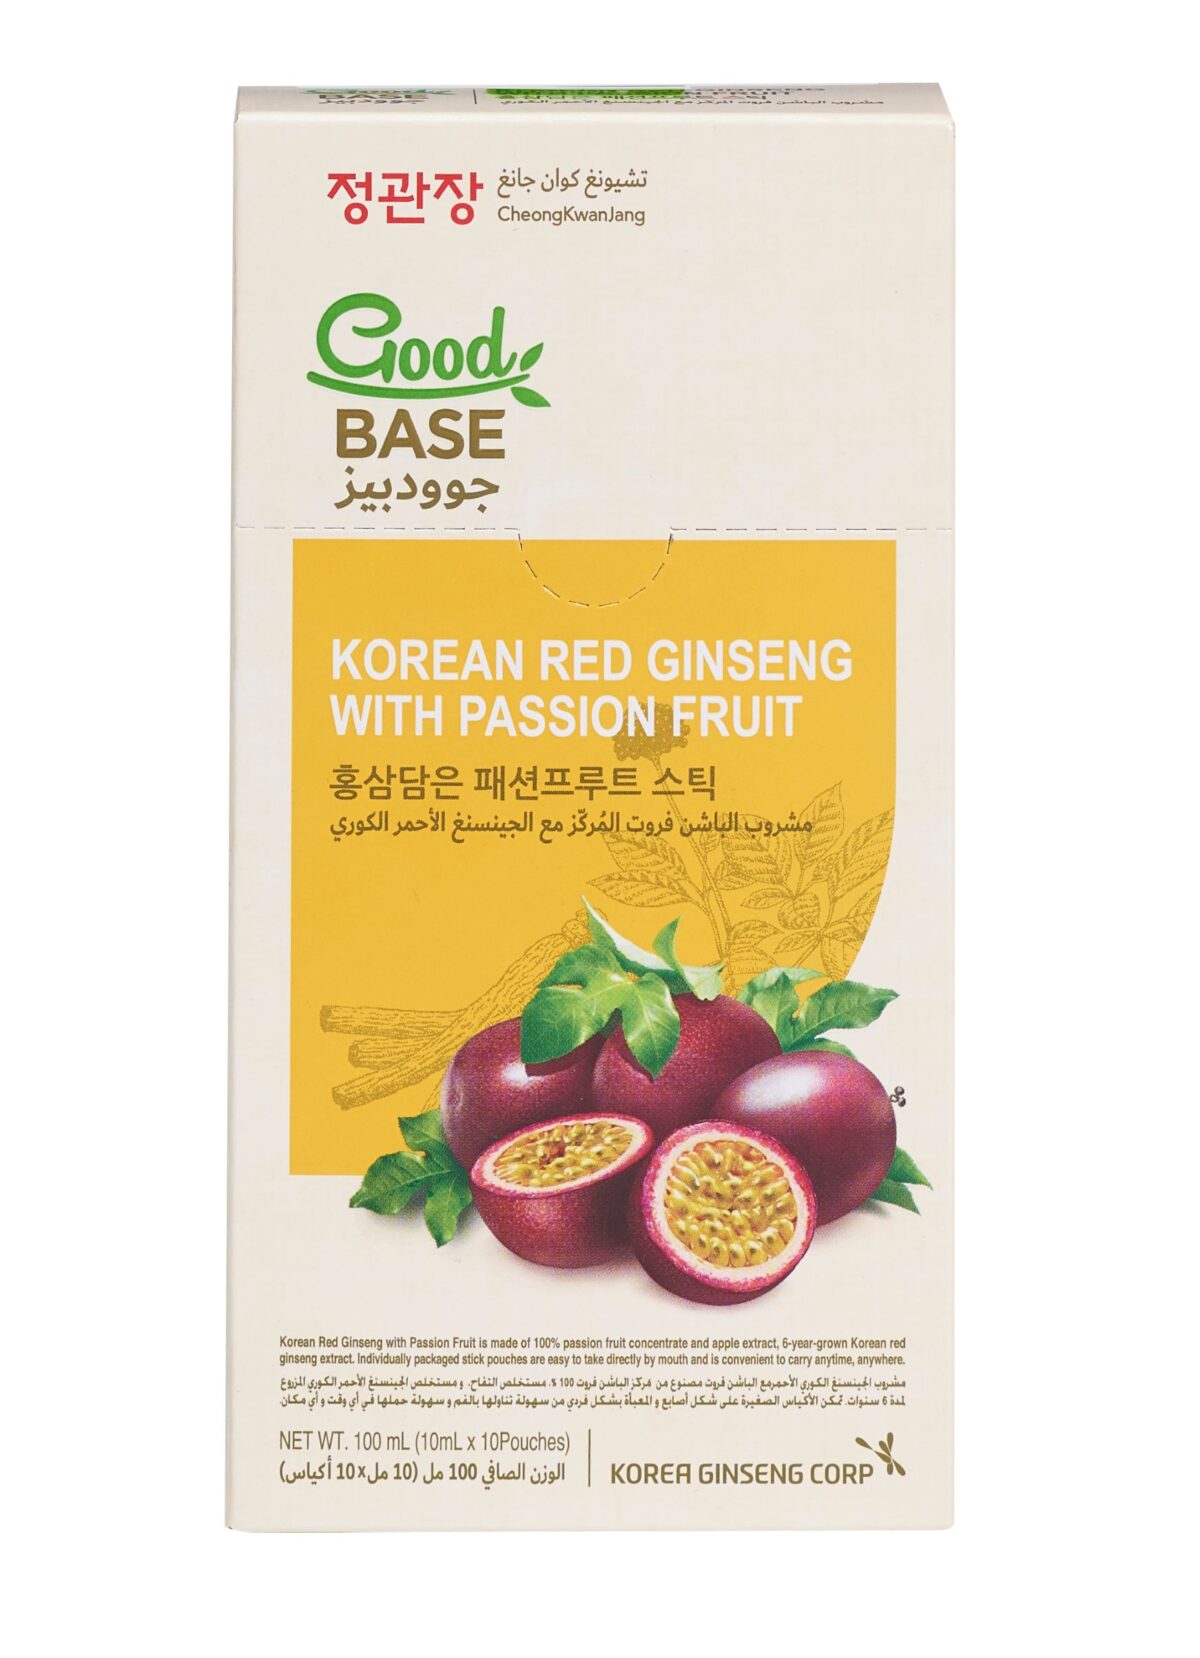 Goodbase_Passionfruit_Drink_Box_Front_Label_02